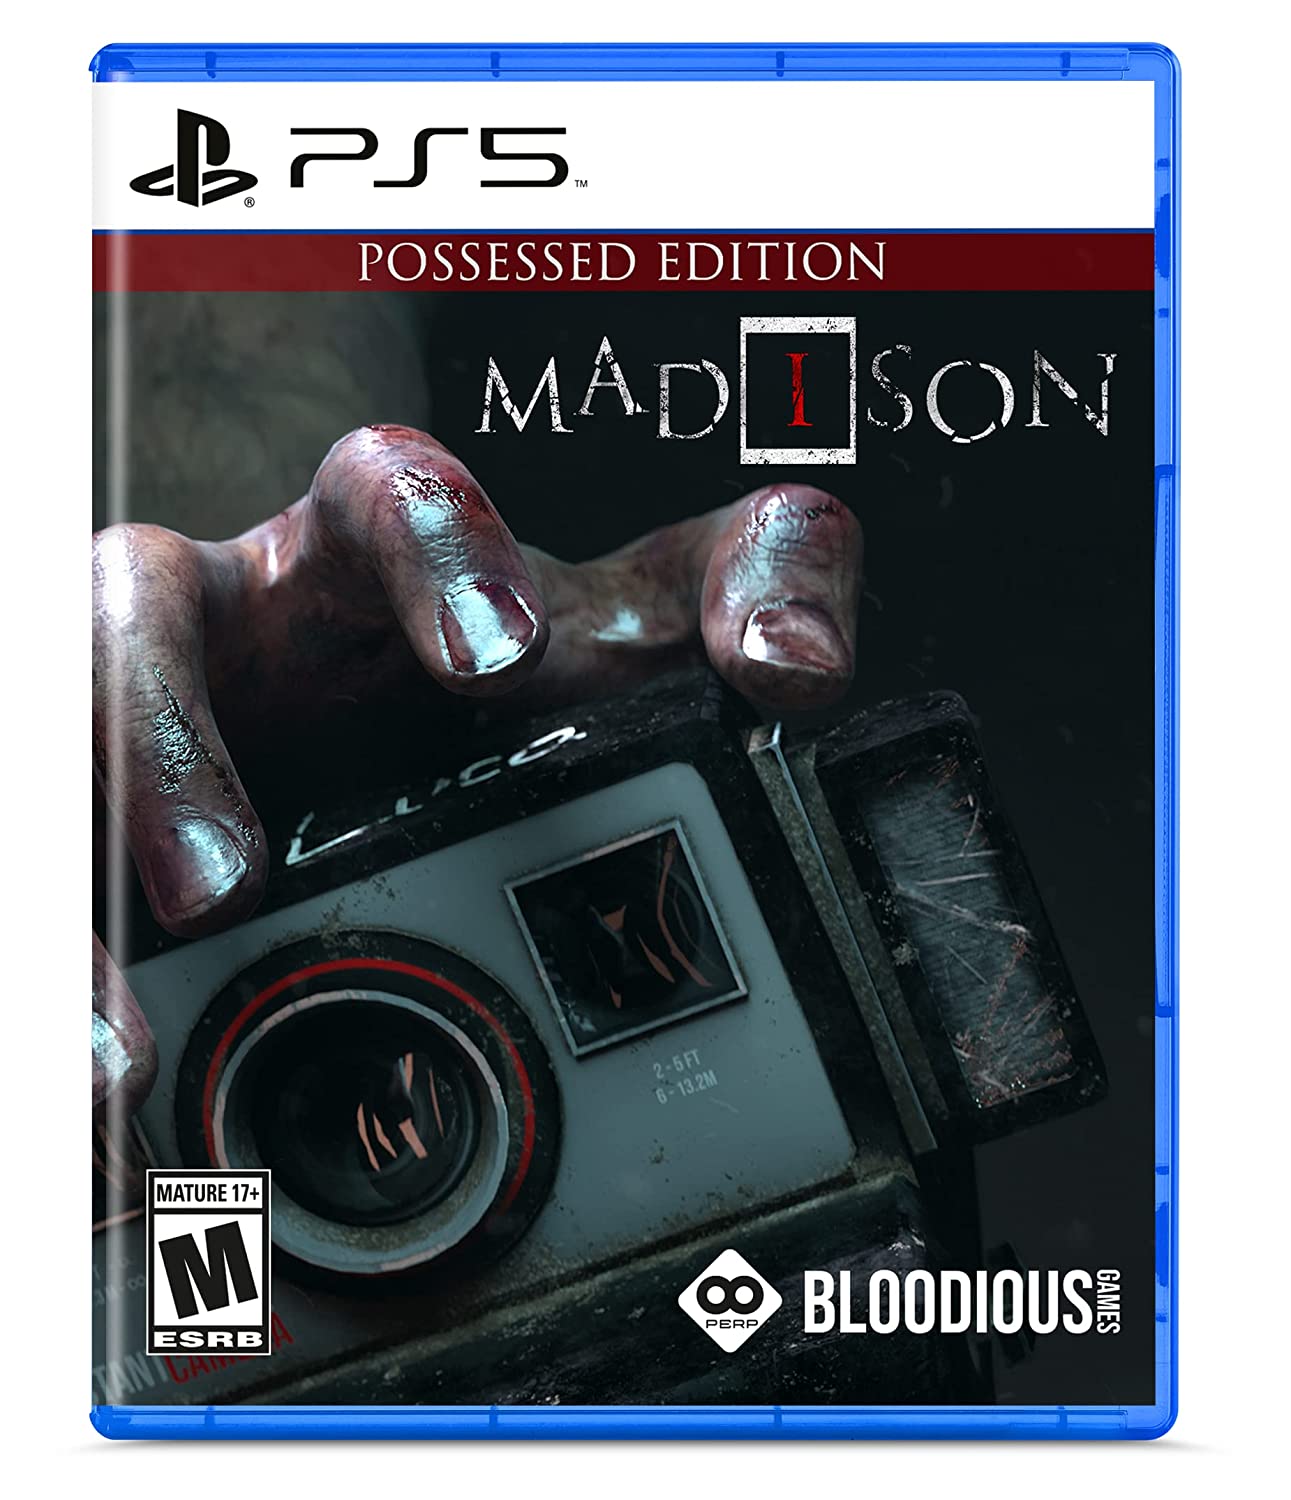 MADiSON [Possessed Edition] Now Available For Pre-order!